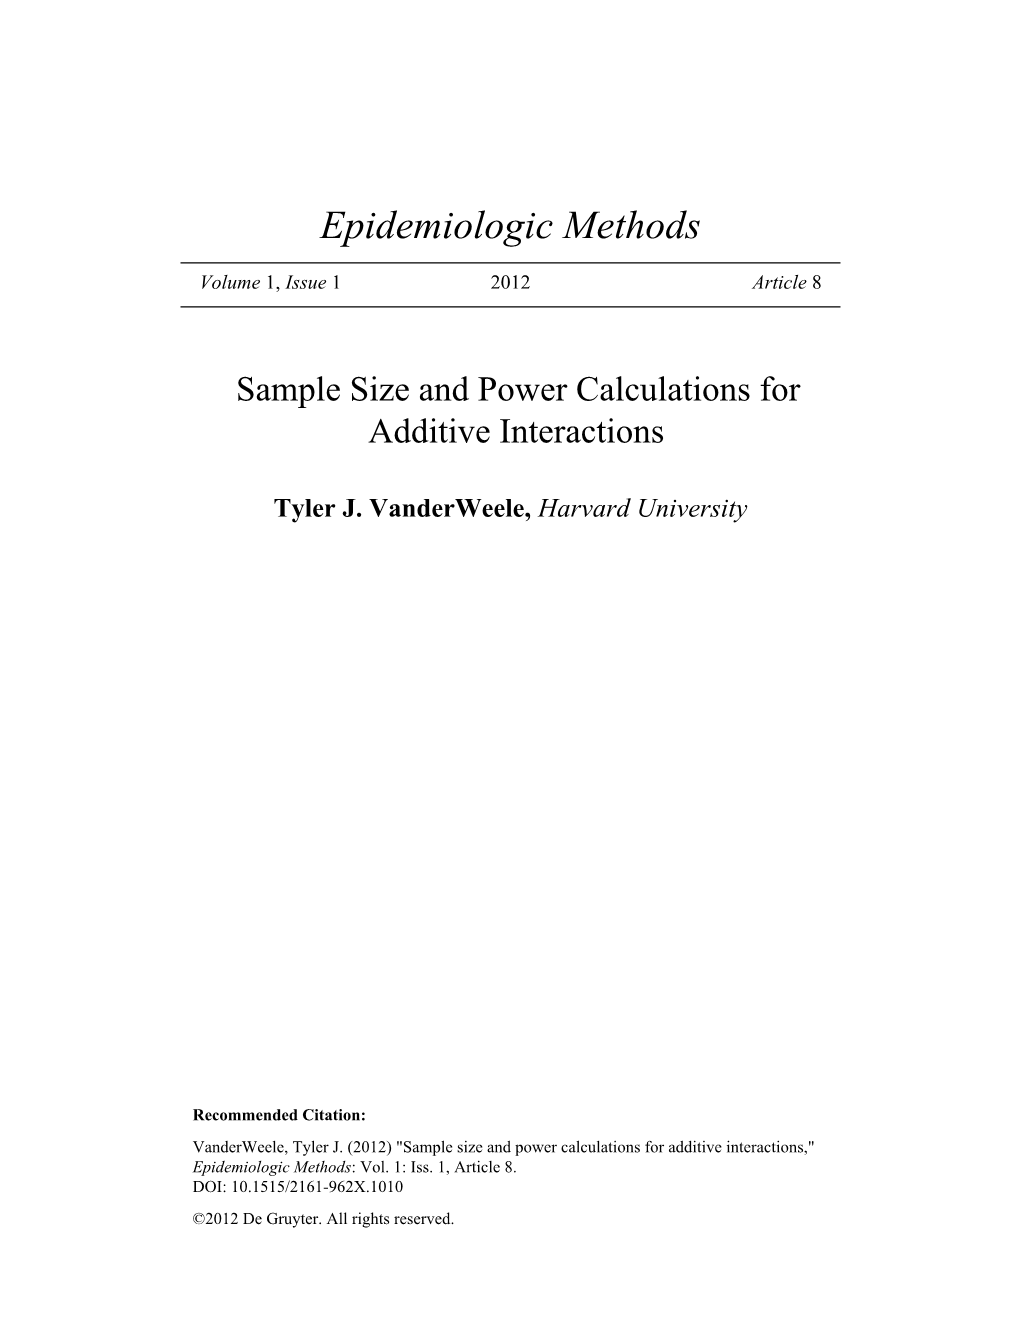 Sample Size and Power Calculations for Additive Interactions